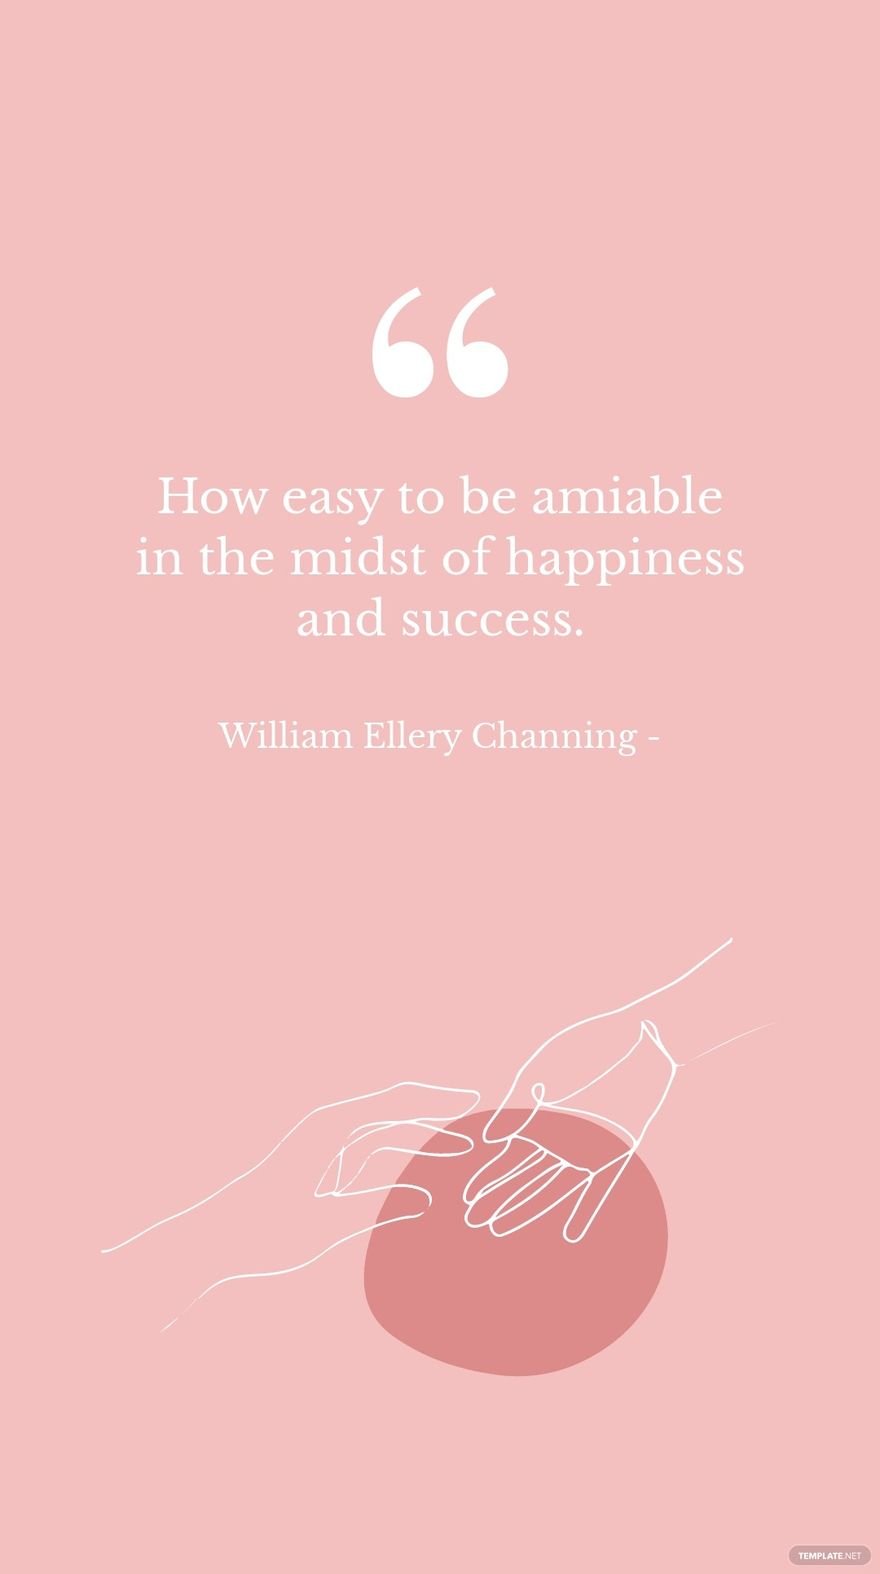 William Ellery Channing - How easy to be amiable in the midst of happiness and success. in JPG